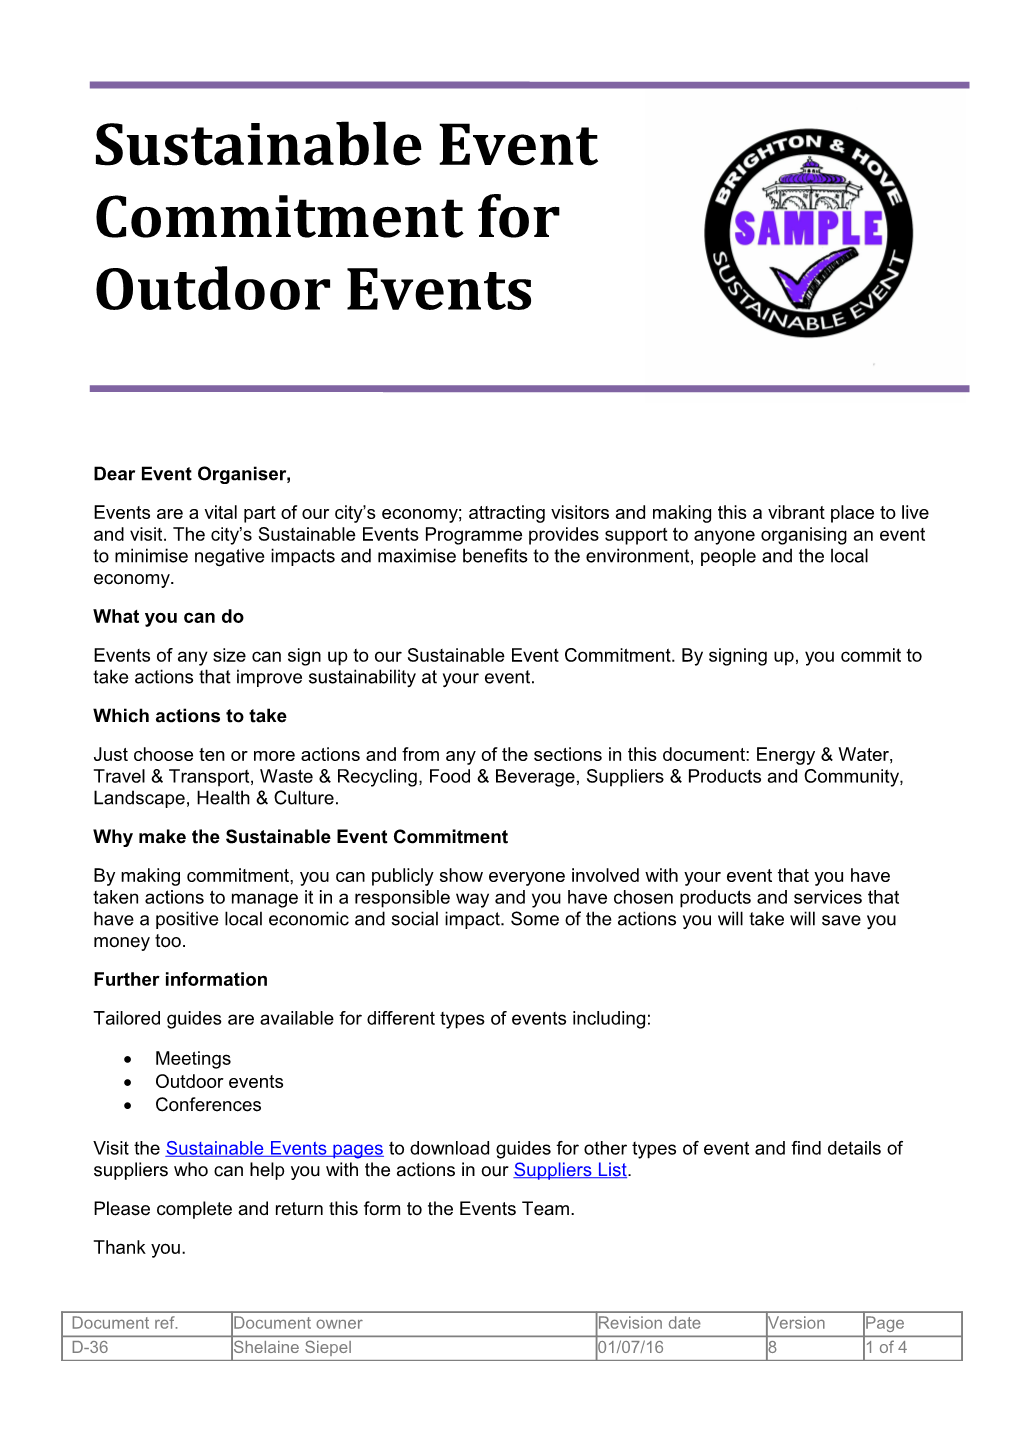 Sustainable Event Commitment for Outdoor Events